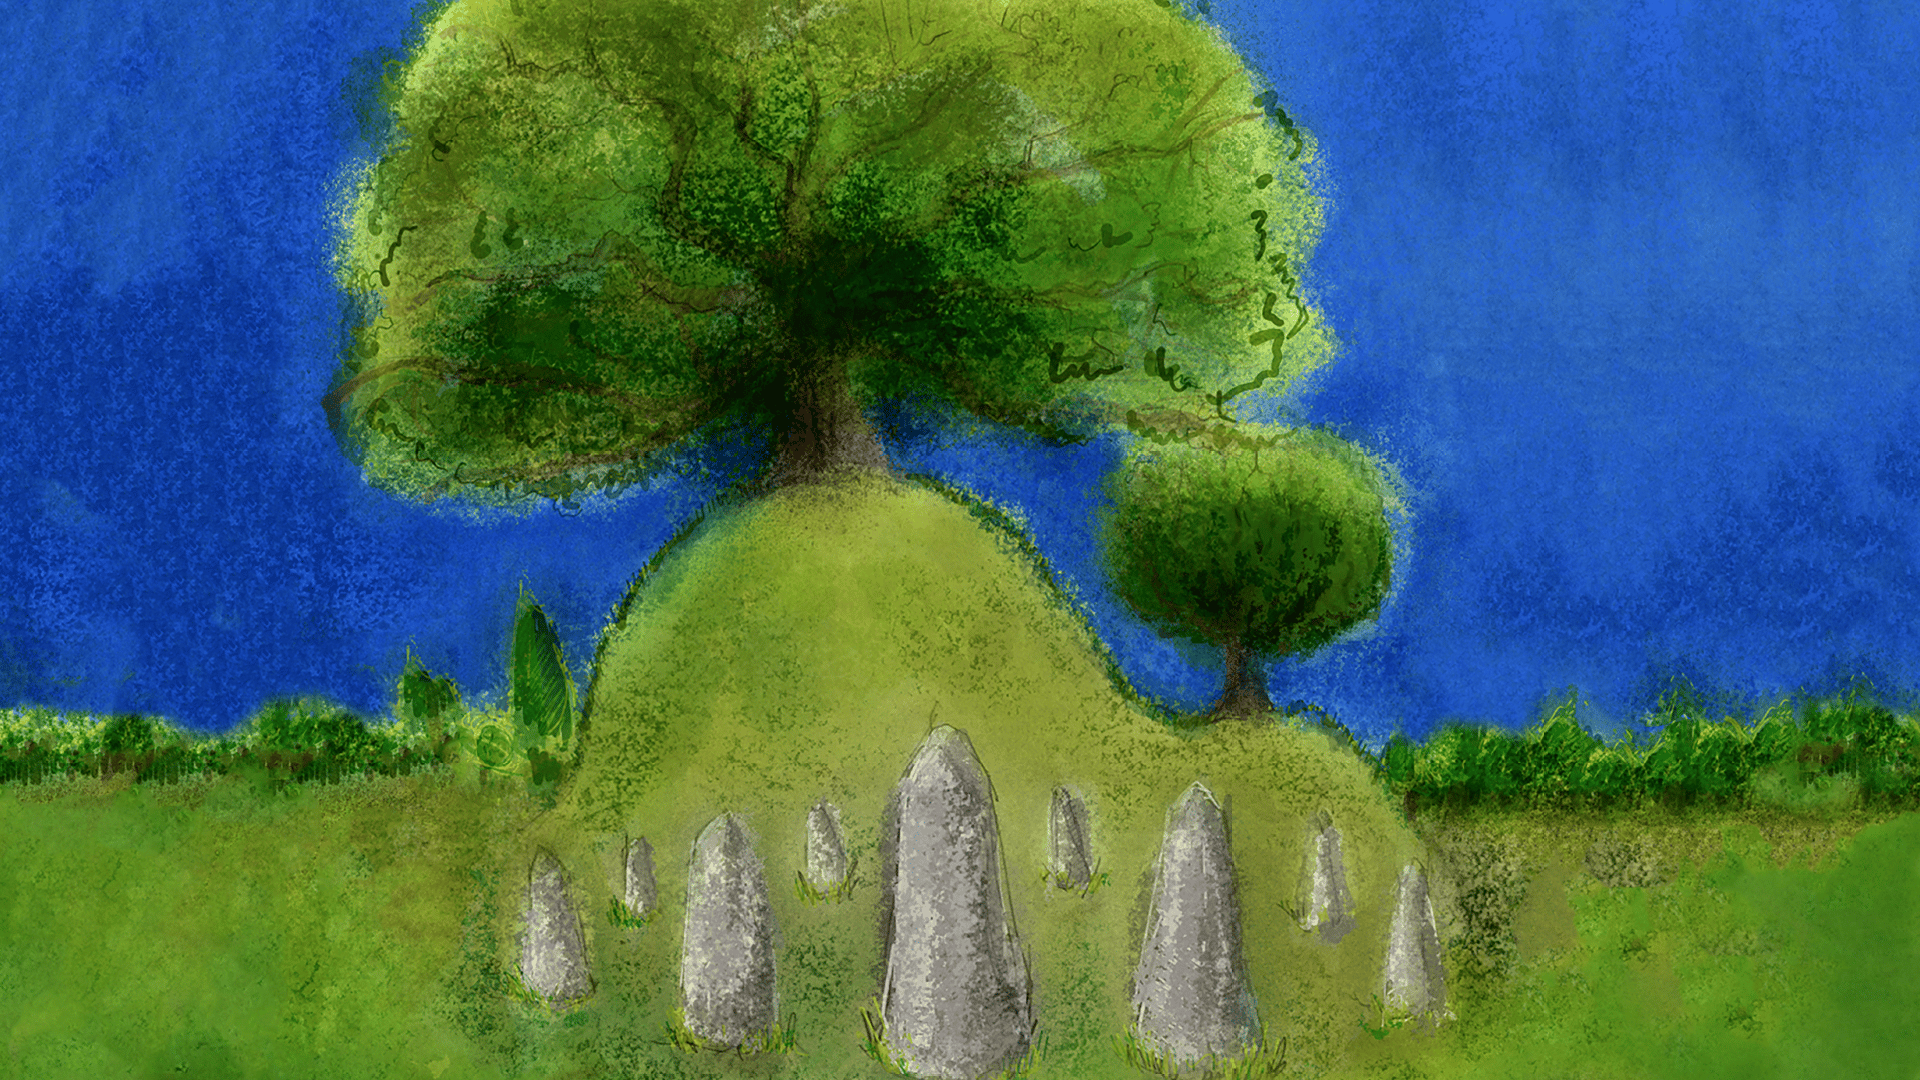 A watercolour illustration with deep colours, or a small hill with a big oak tree on top, surrounded by standing stones.